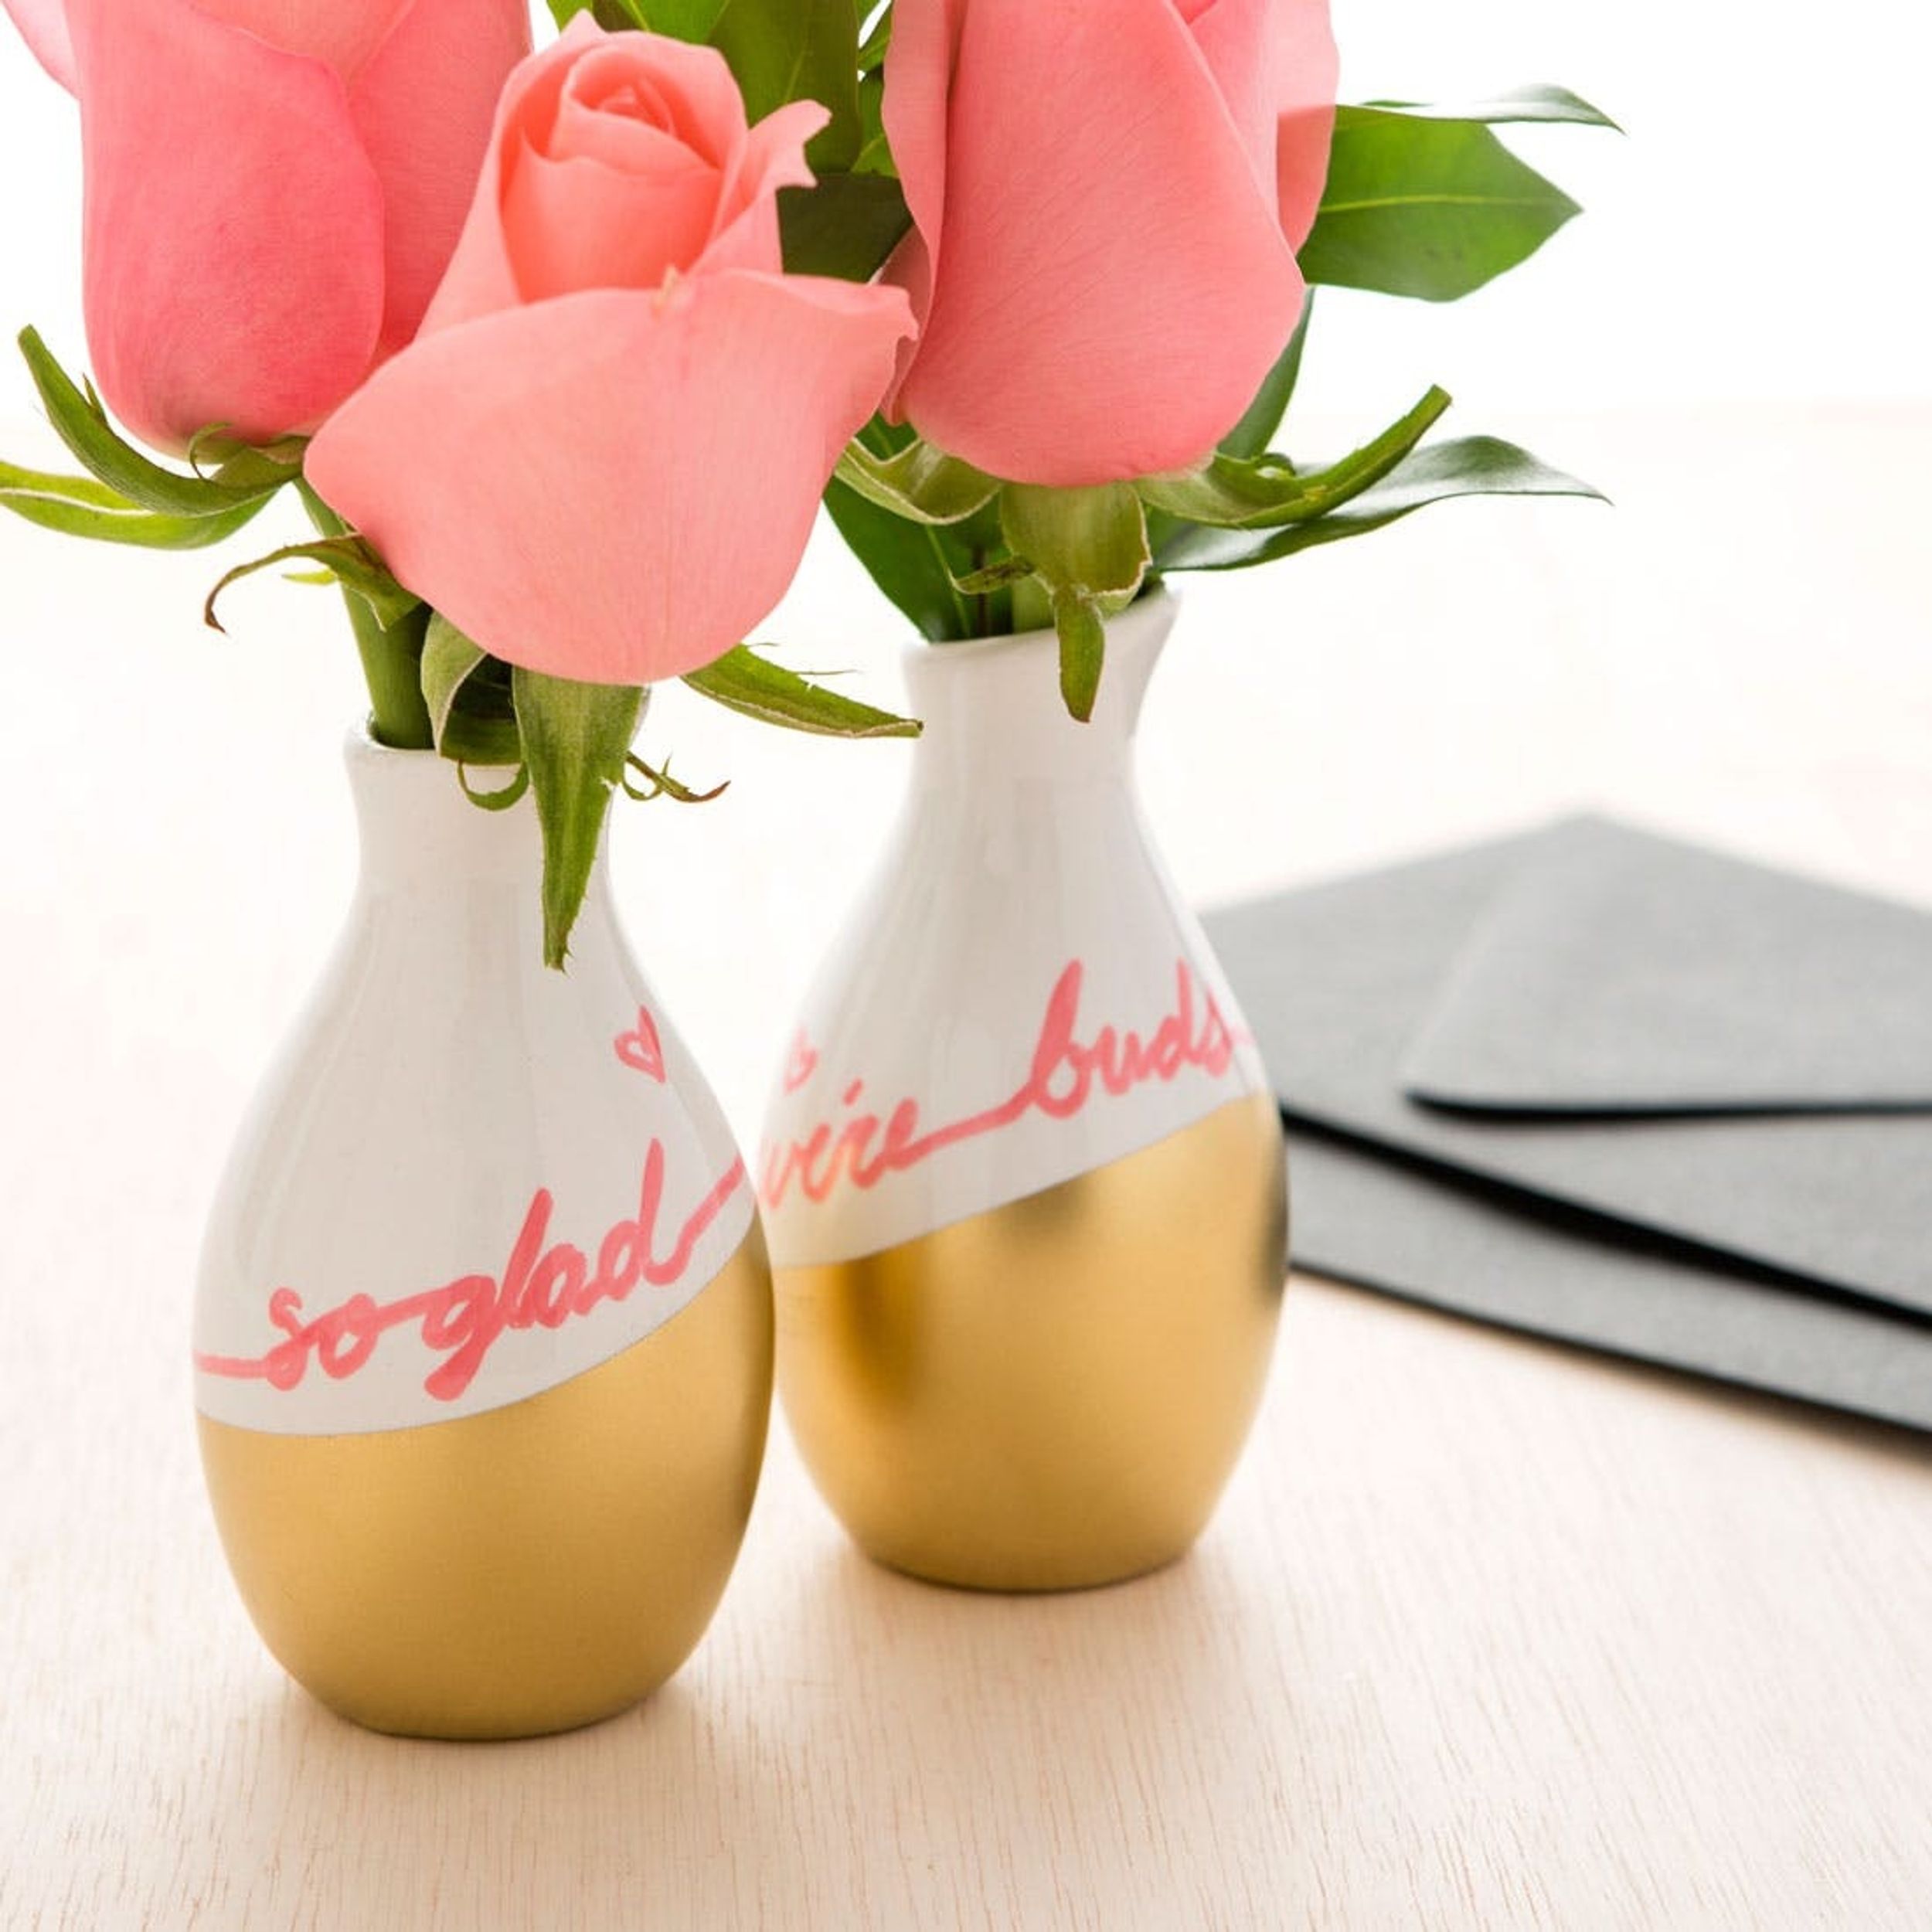 So Glad We’re Buds! How to Make Bud Vases for Your Valentines